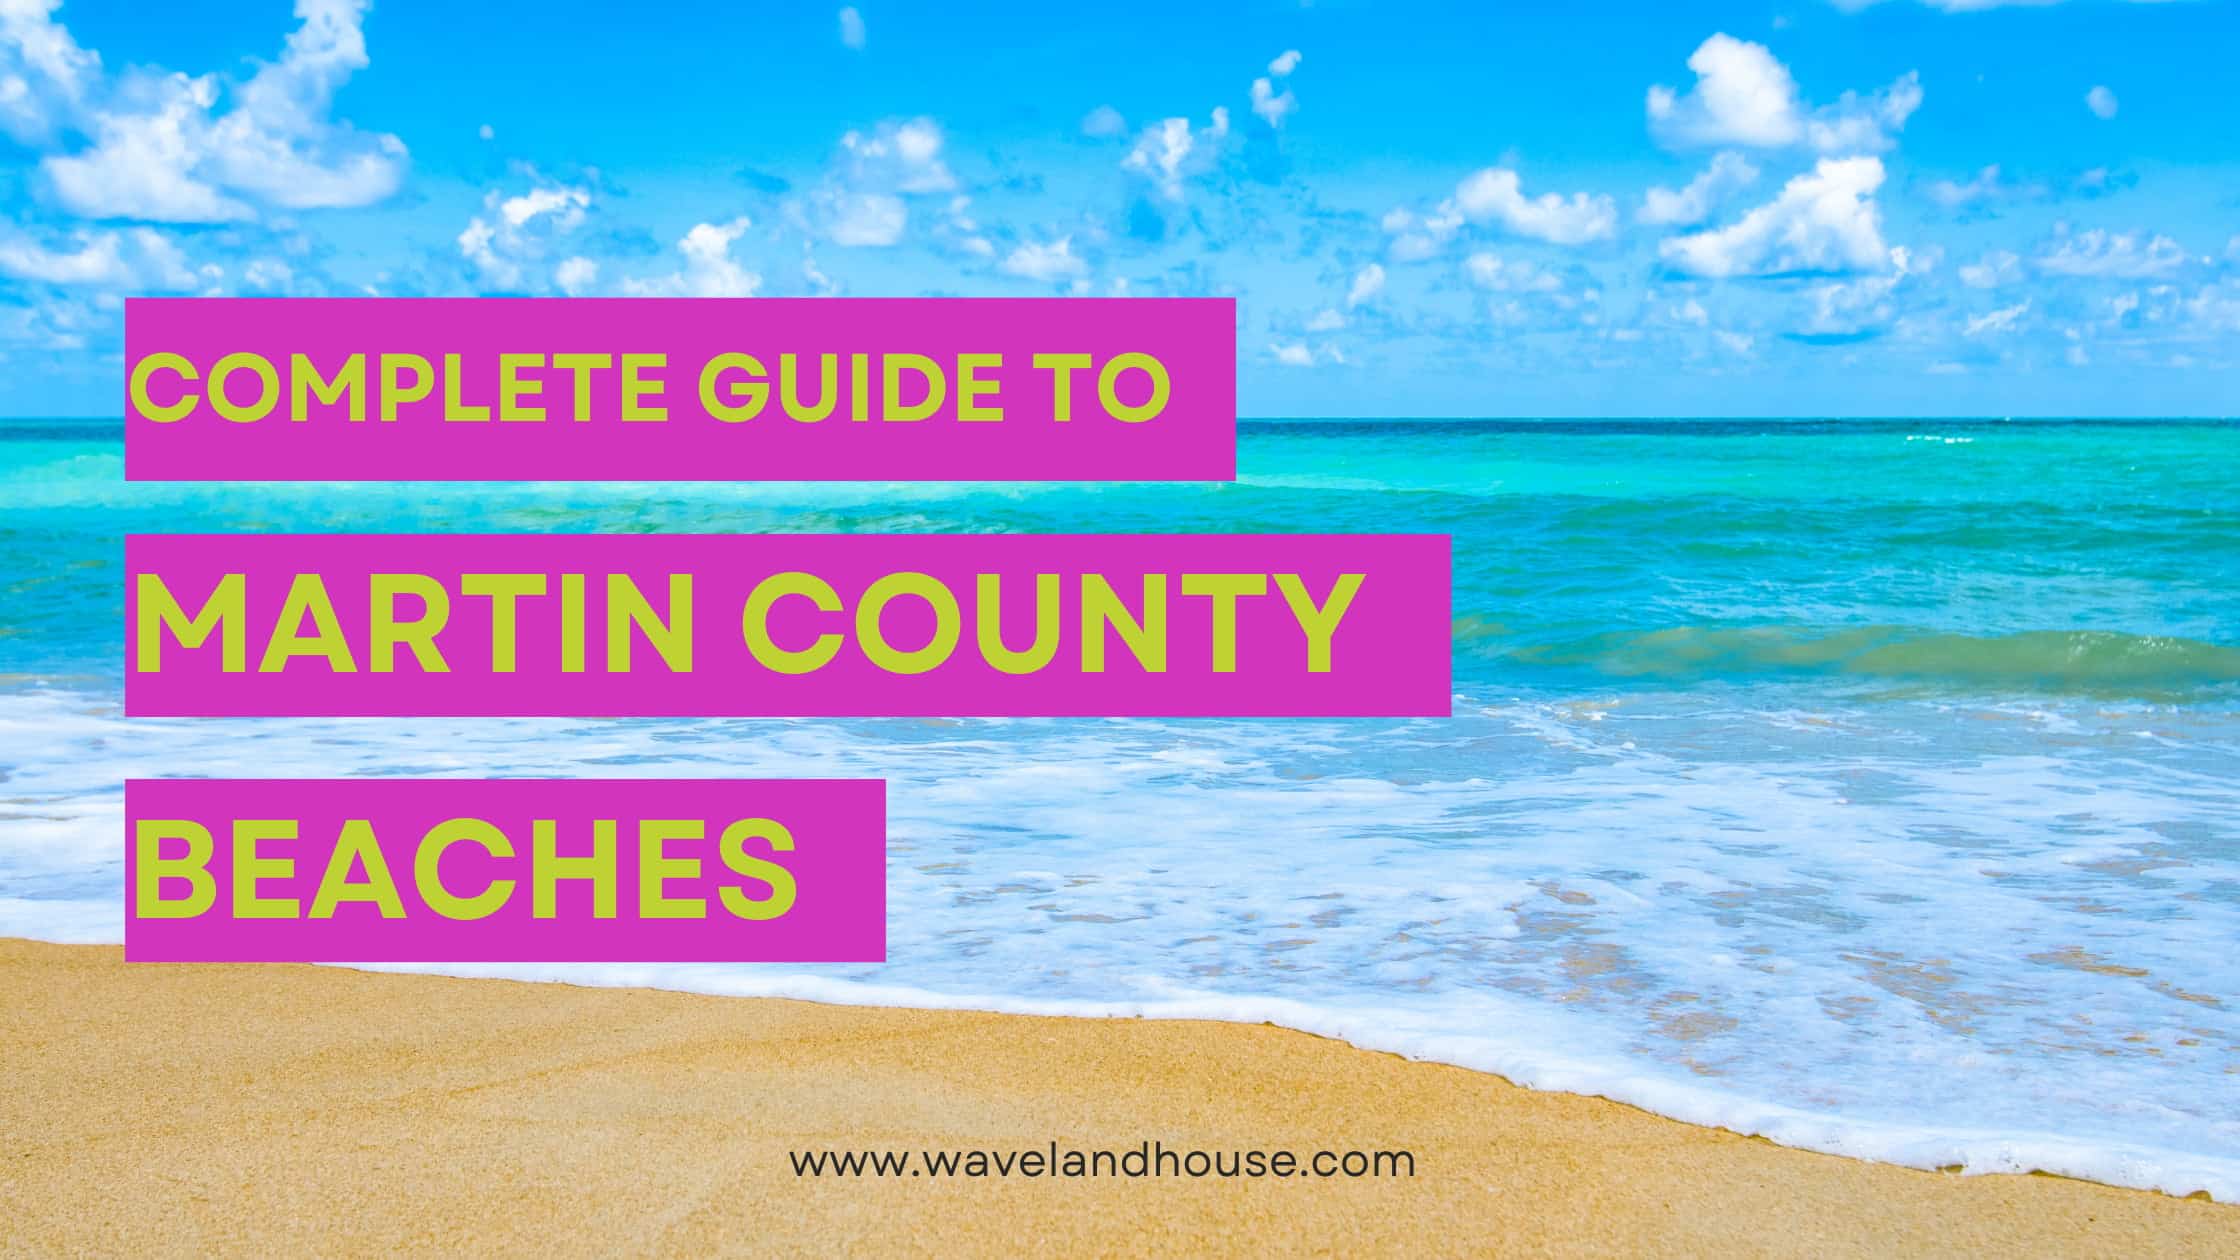 A picturesque beach view with turquoise waters and blue skies. The text overlay reads "Complete Guide to Martin County Beaches"